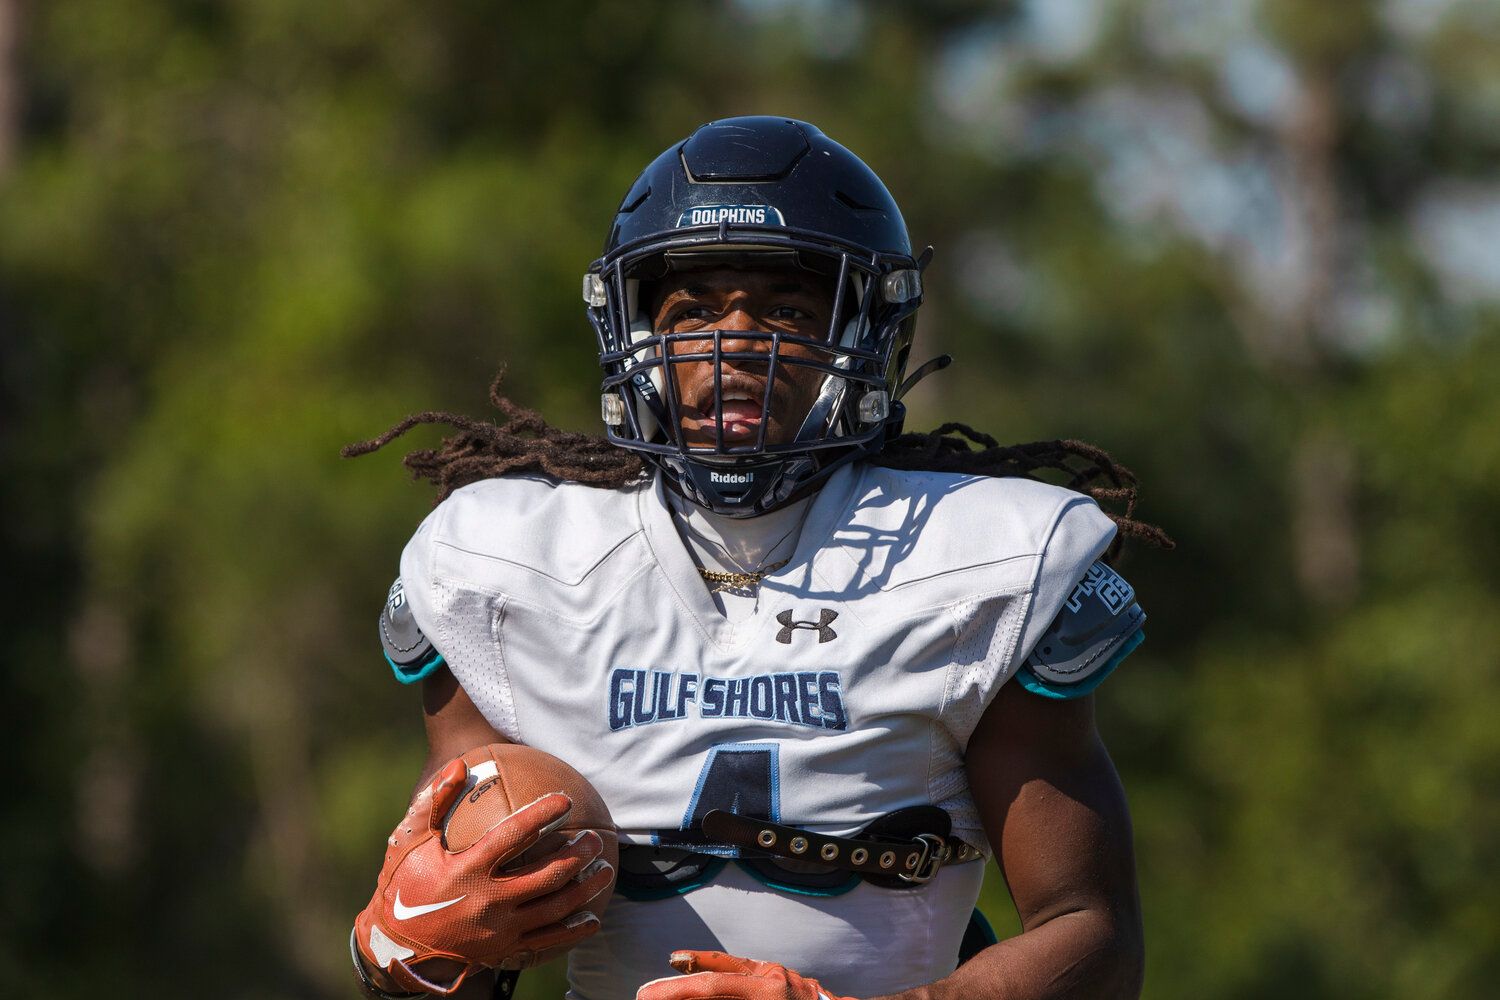 Gulf Shores senior Ronnie Royal works out during May 3’s spring practice at the high school. On Friday against Faith Academy, Royal ran for 100 yards and also recorded 4 tackles to help the Dolphins enact revenge on the Rams with a 31-16 win in Week 3.